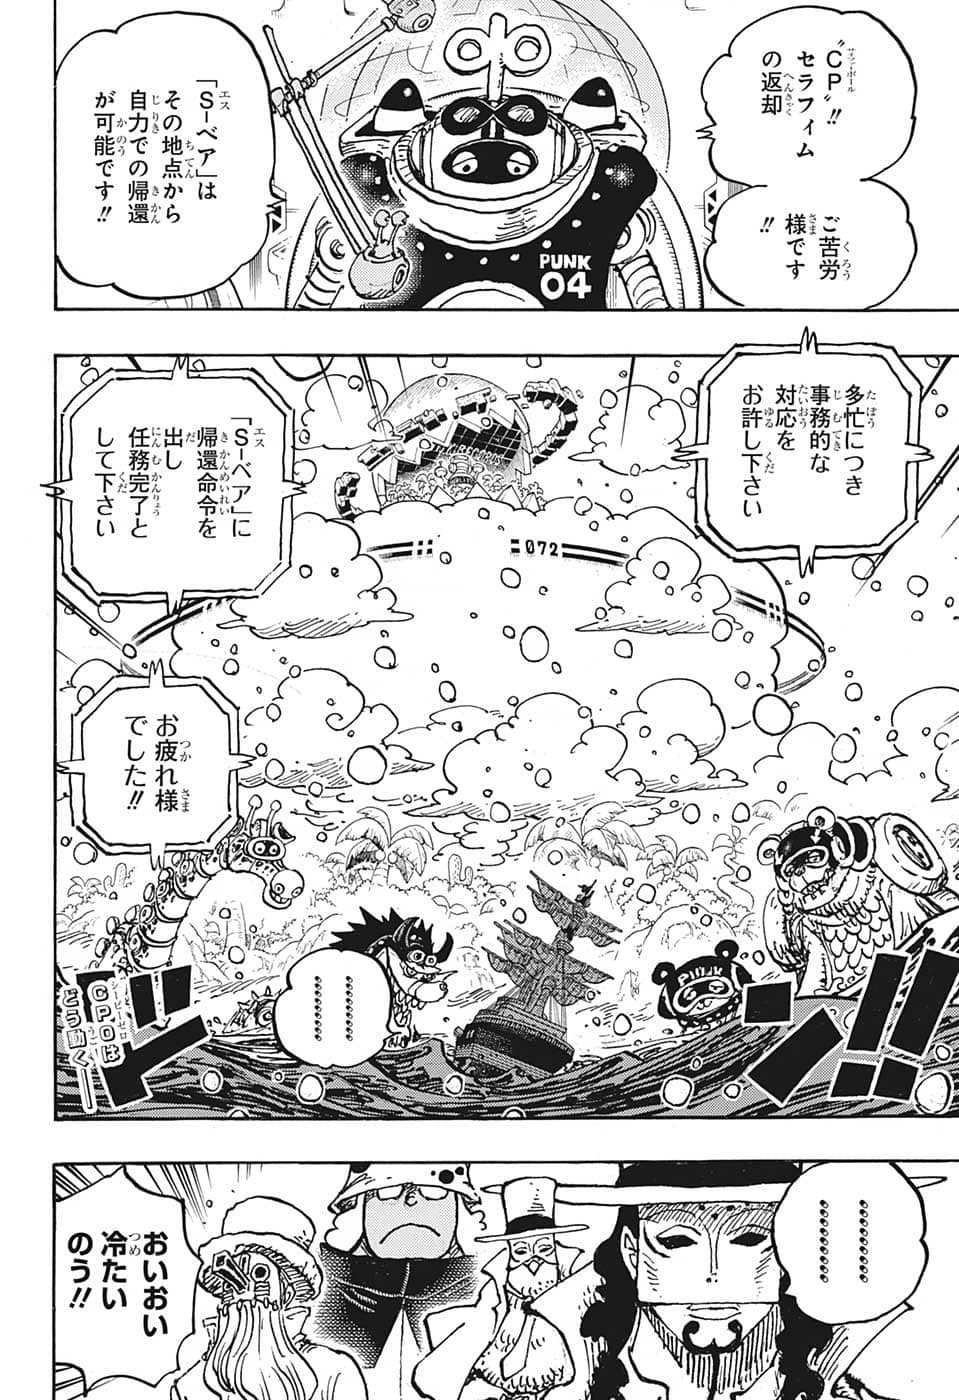 One Piece - Chapter 1068 - Page 2